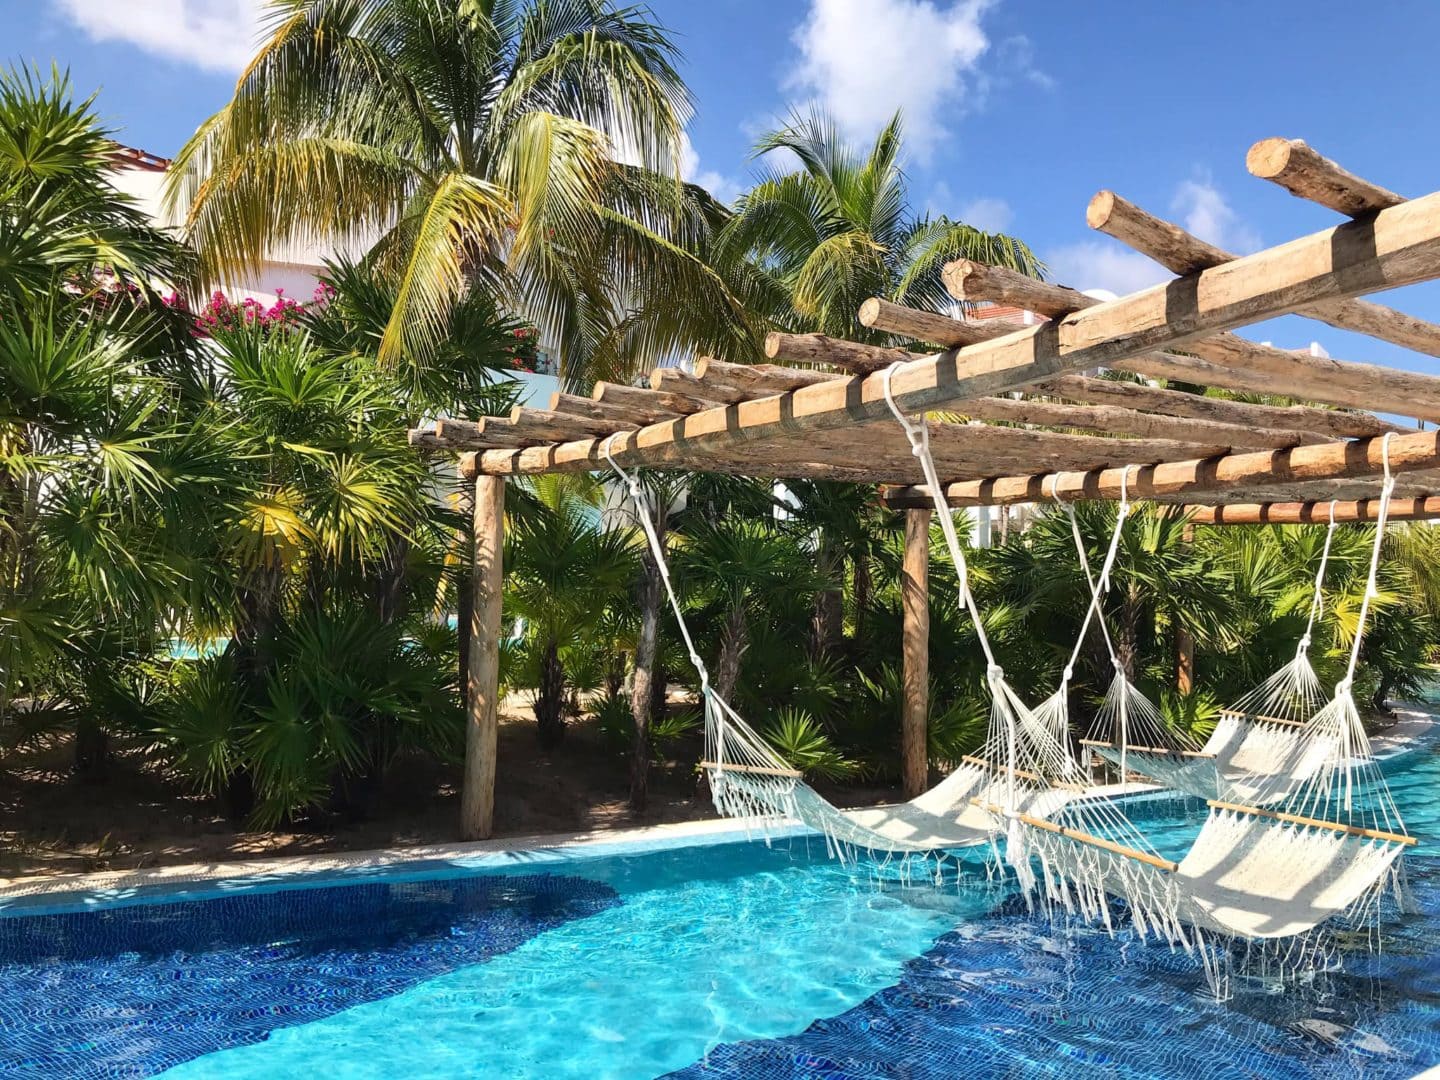 Excellence Playa Mujeres: Mexico’s Best Adults-Only Resort